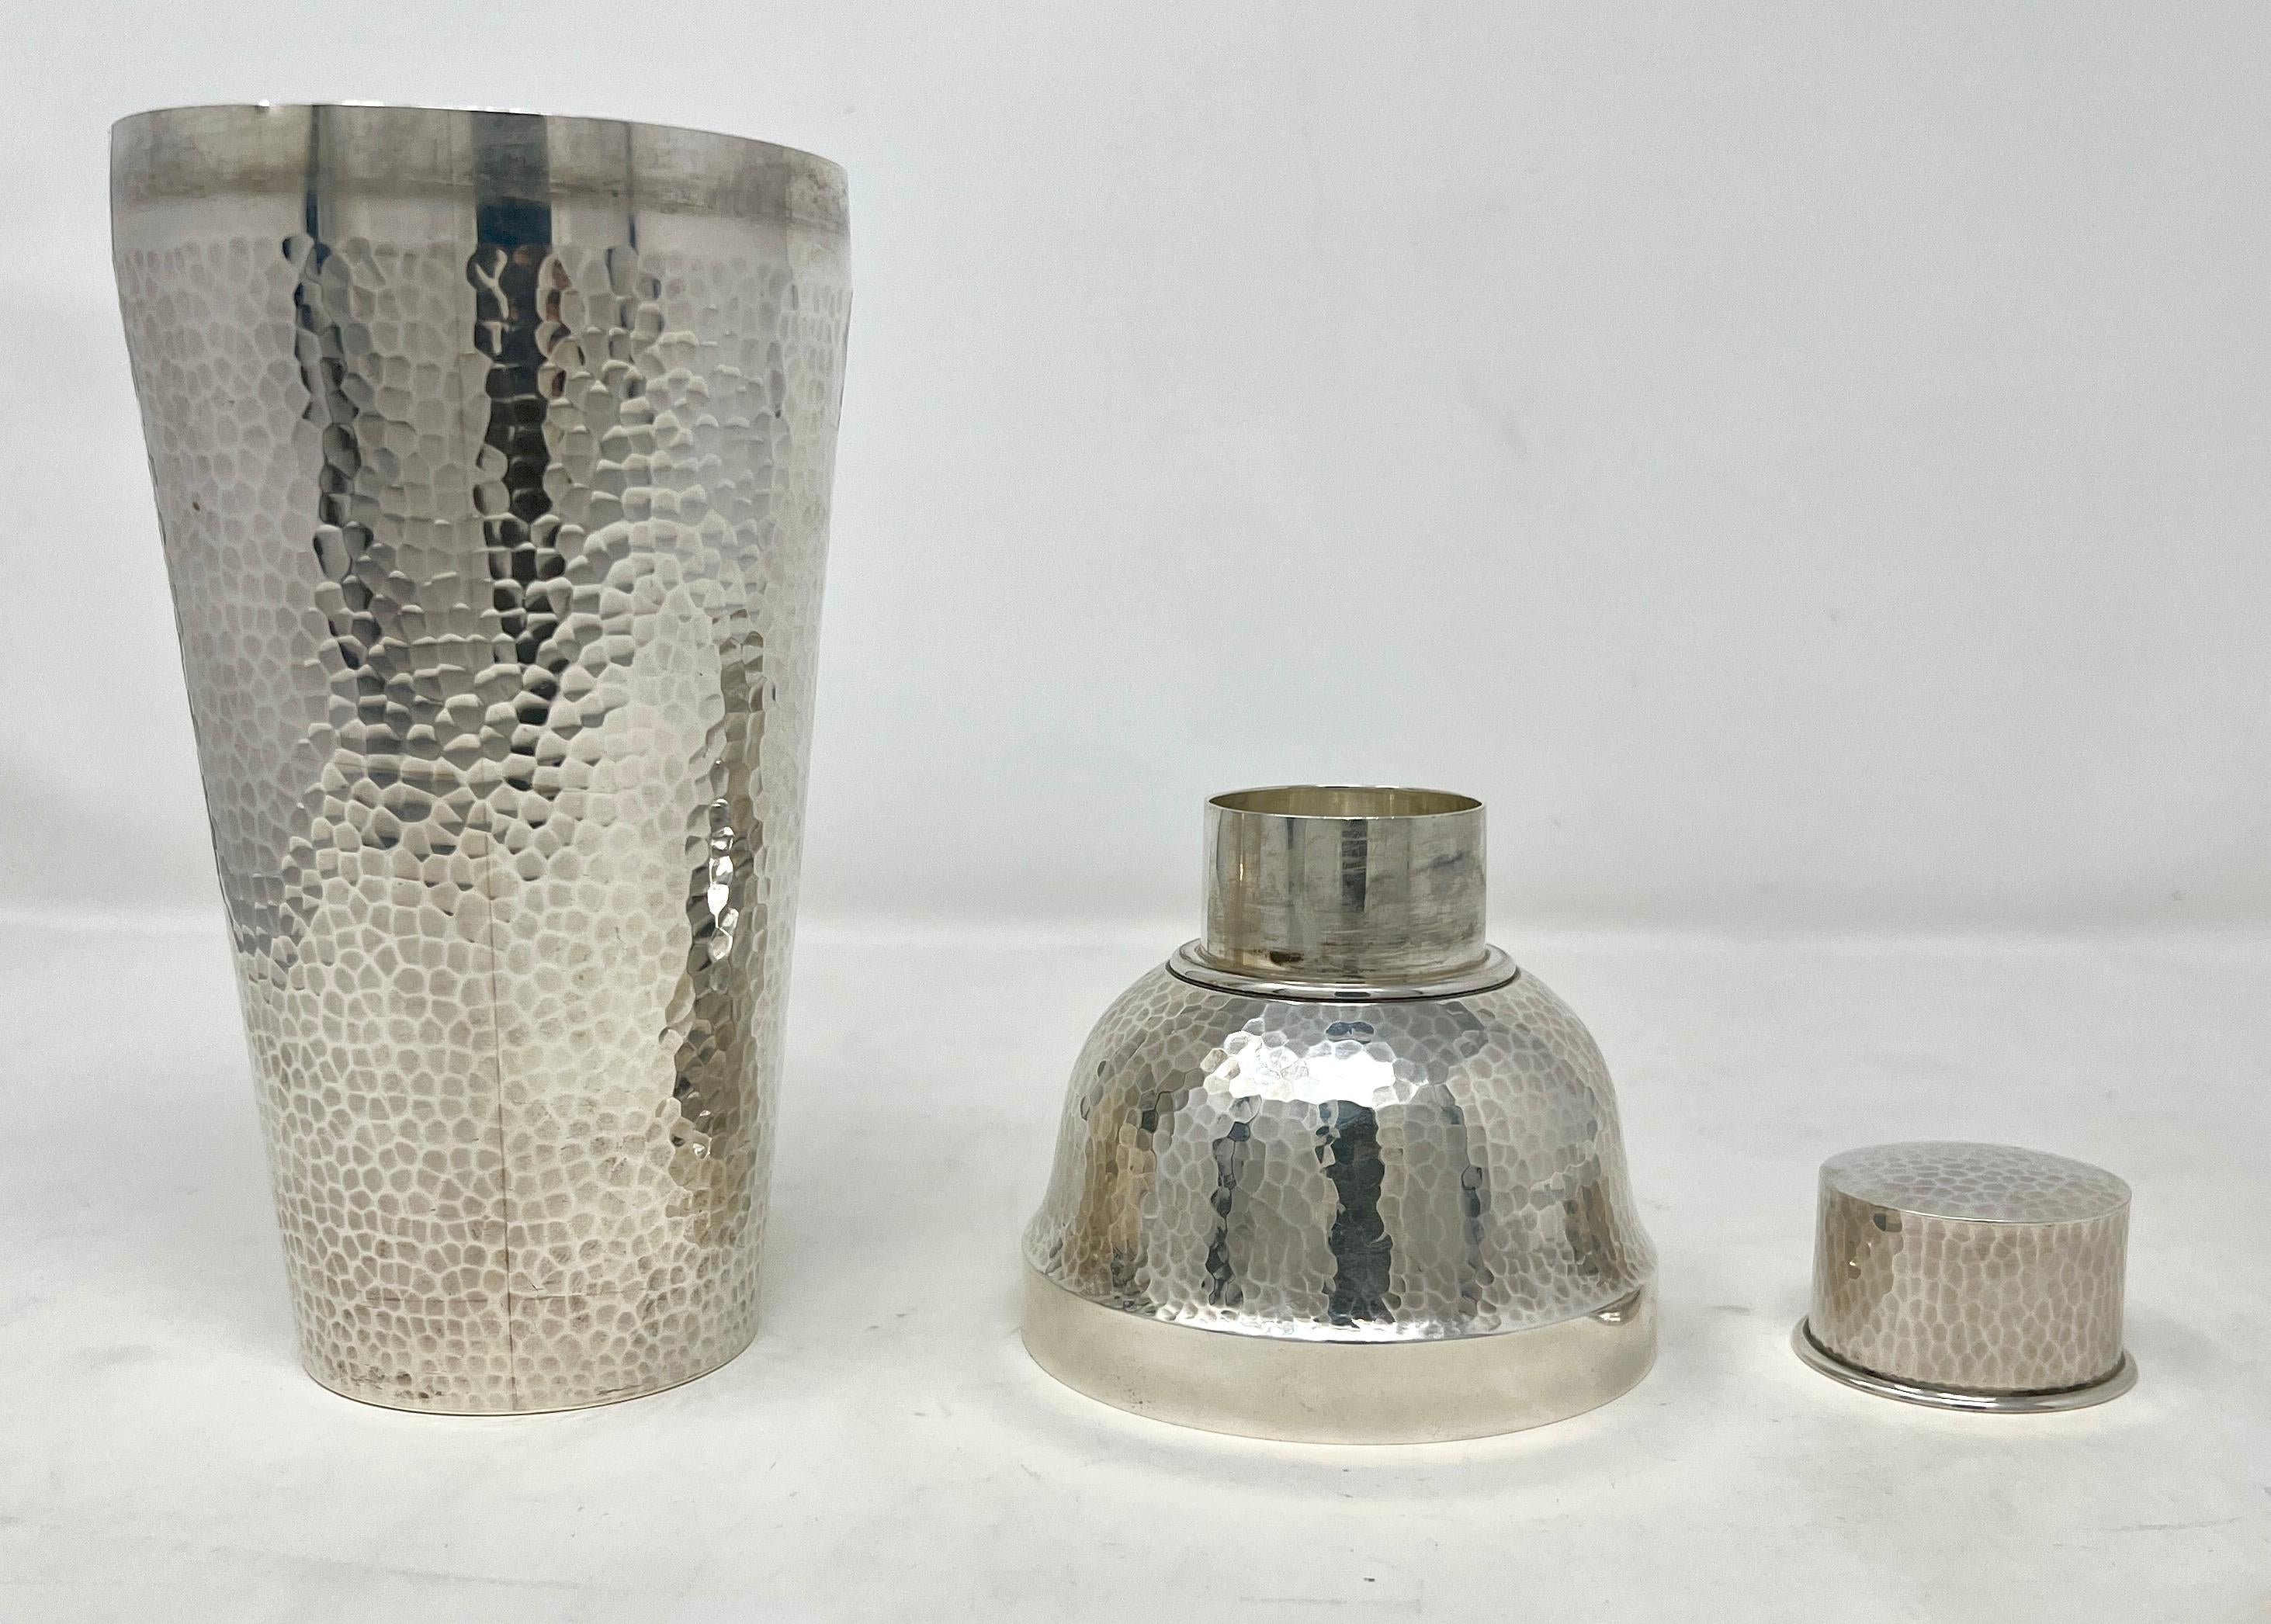 Handmade Antique American Art Deco 950 Sterling Silver Hallmarked Hammered Finish Cocktail Shaker, Circa 1910-1920's.
